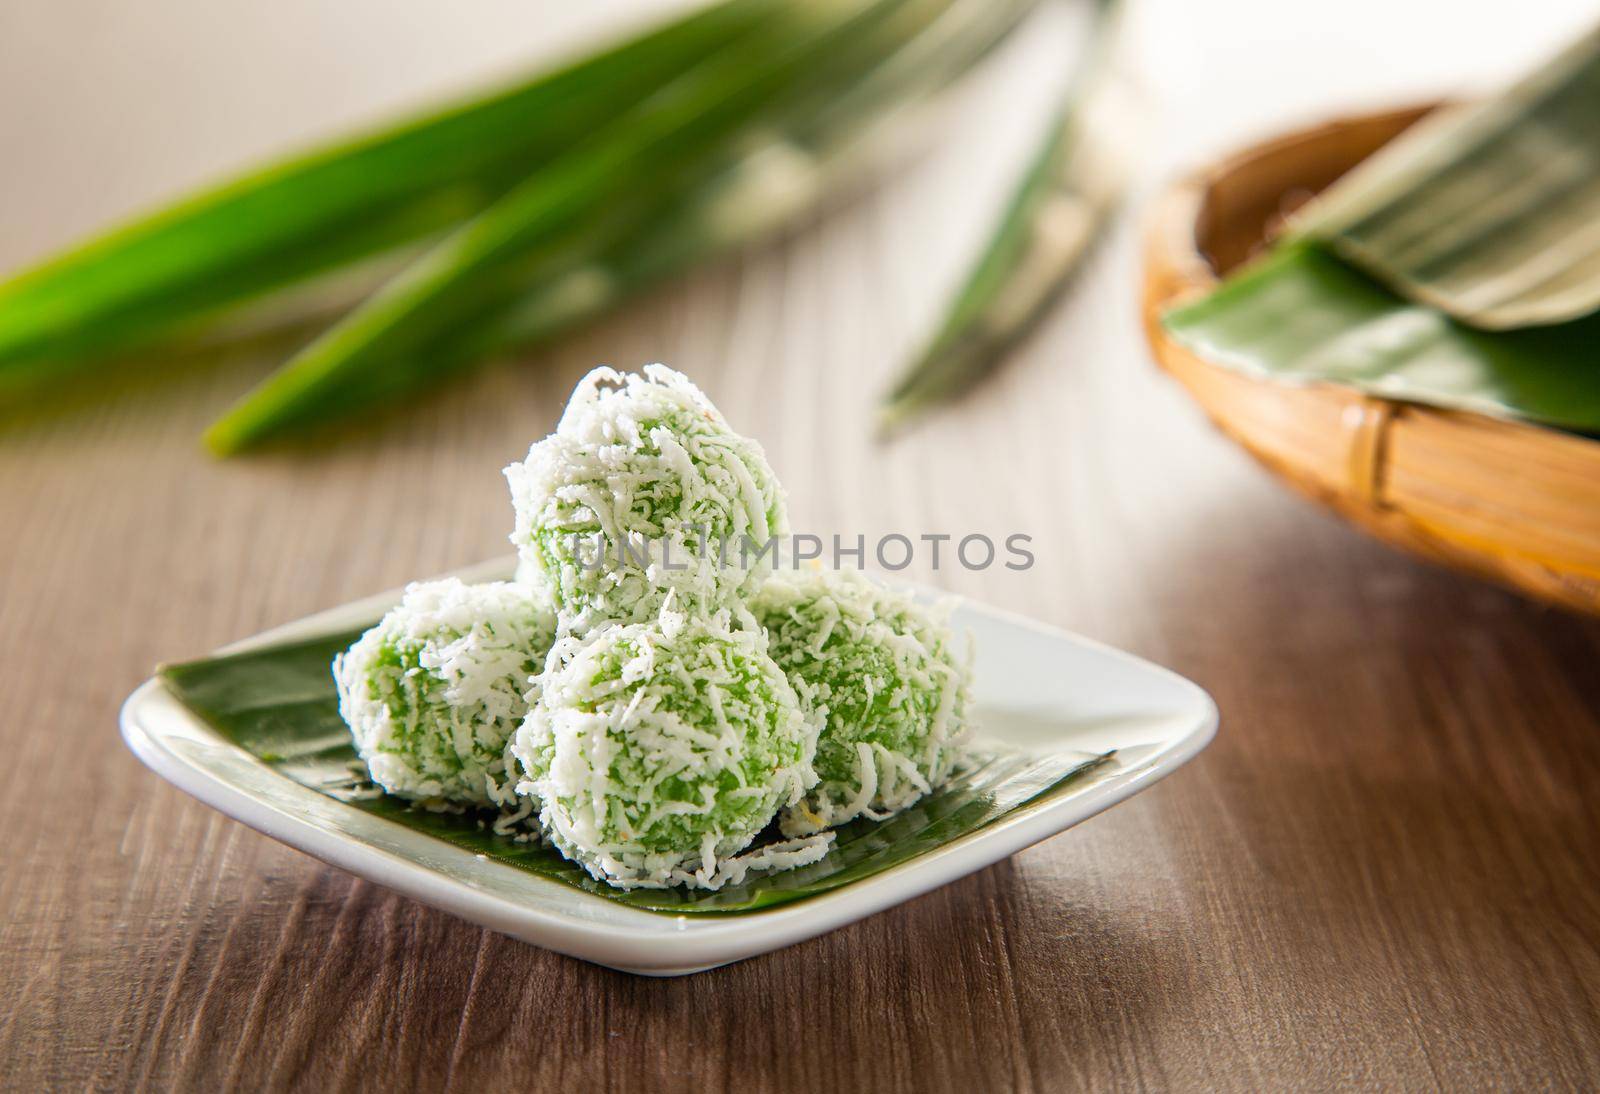 Onde onde is a traditional Malay snack made of rice ball filled with brown sugar, coated in grated coconut. by tehcheesiong